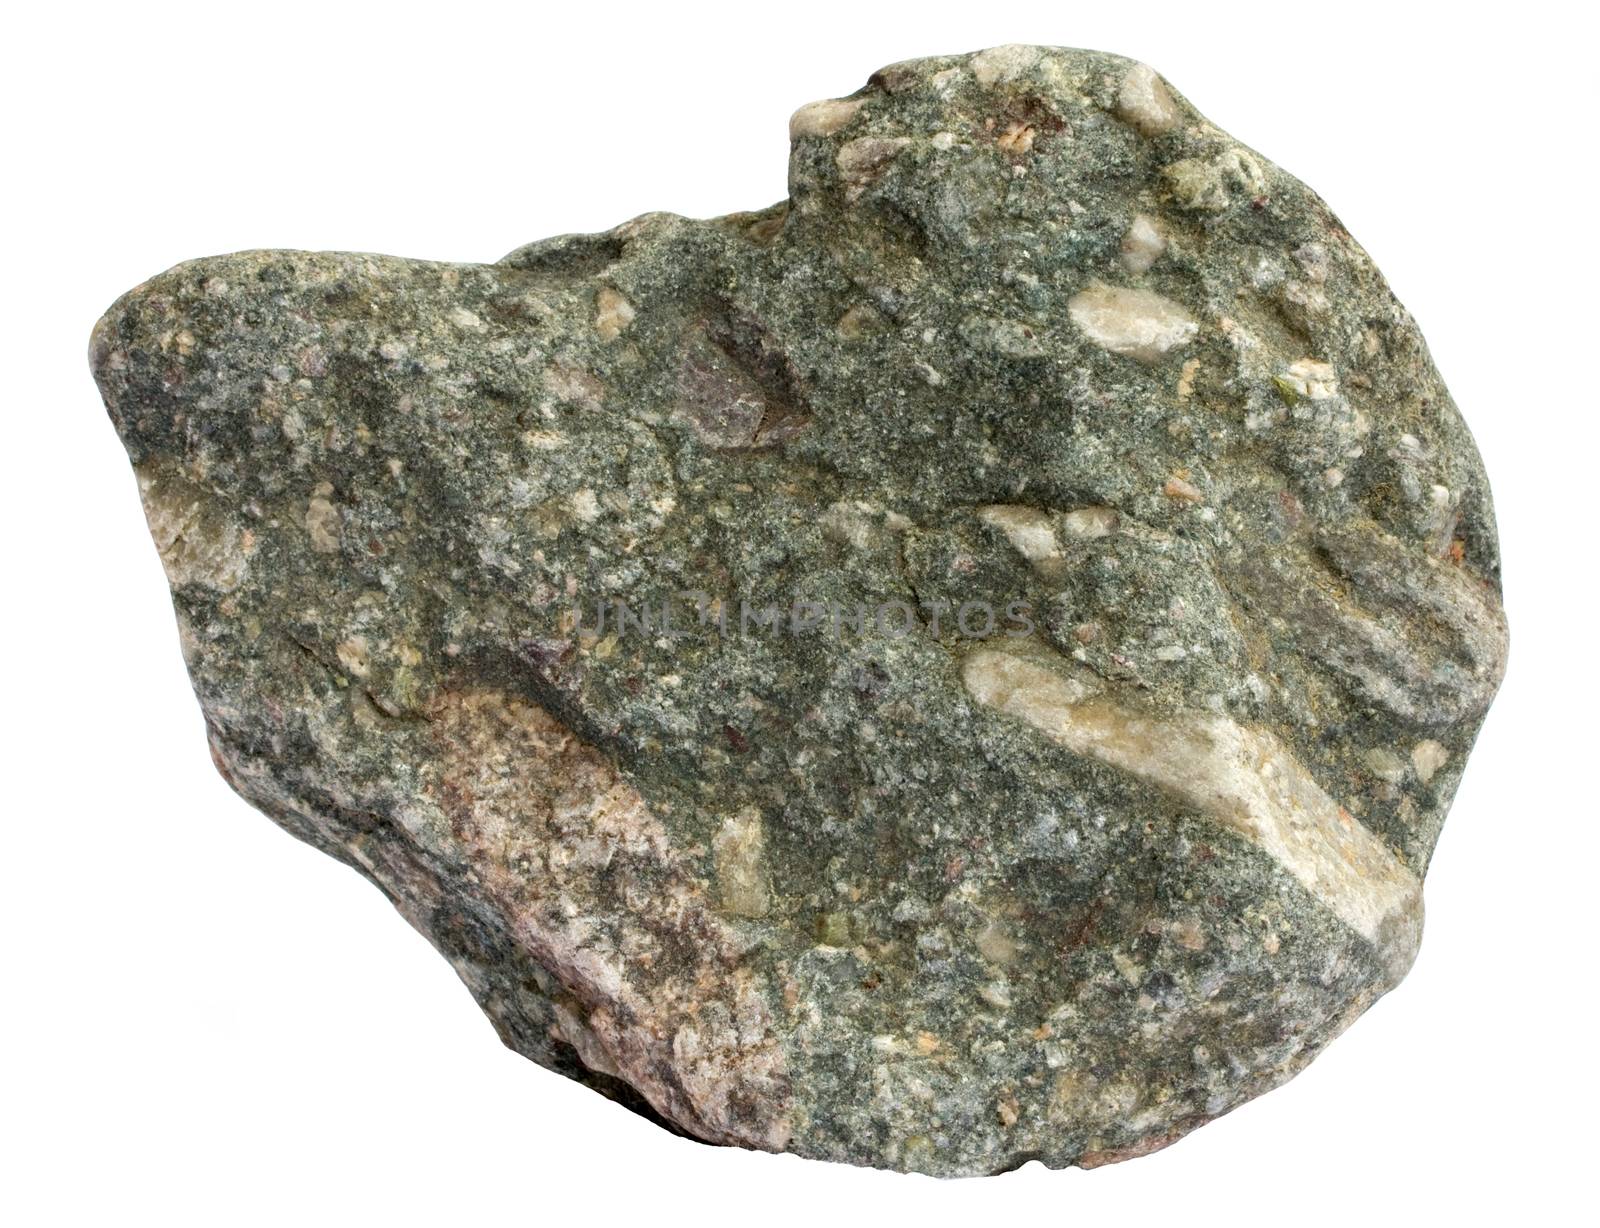 Single piece of sedimentary oligomict paraconglomerate of glacial alluvial origin. Clasts are in the pebble to cobble size range.